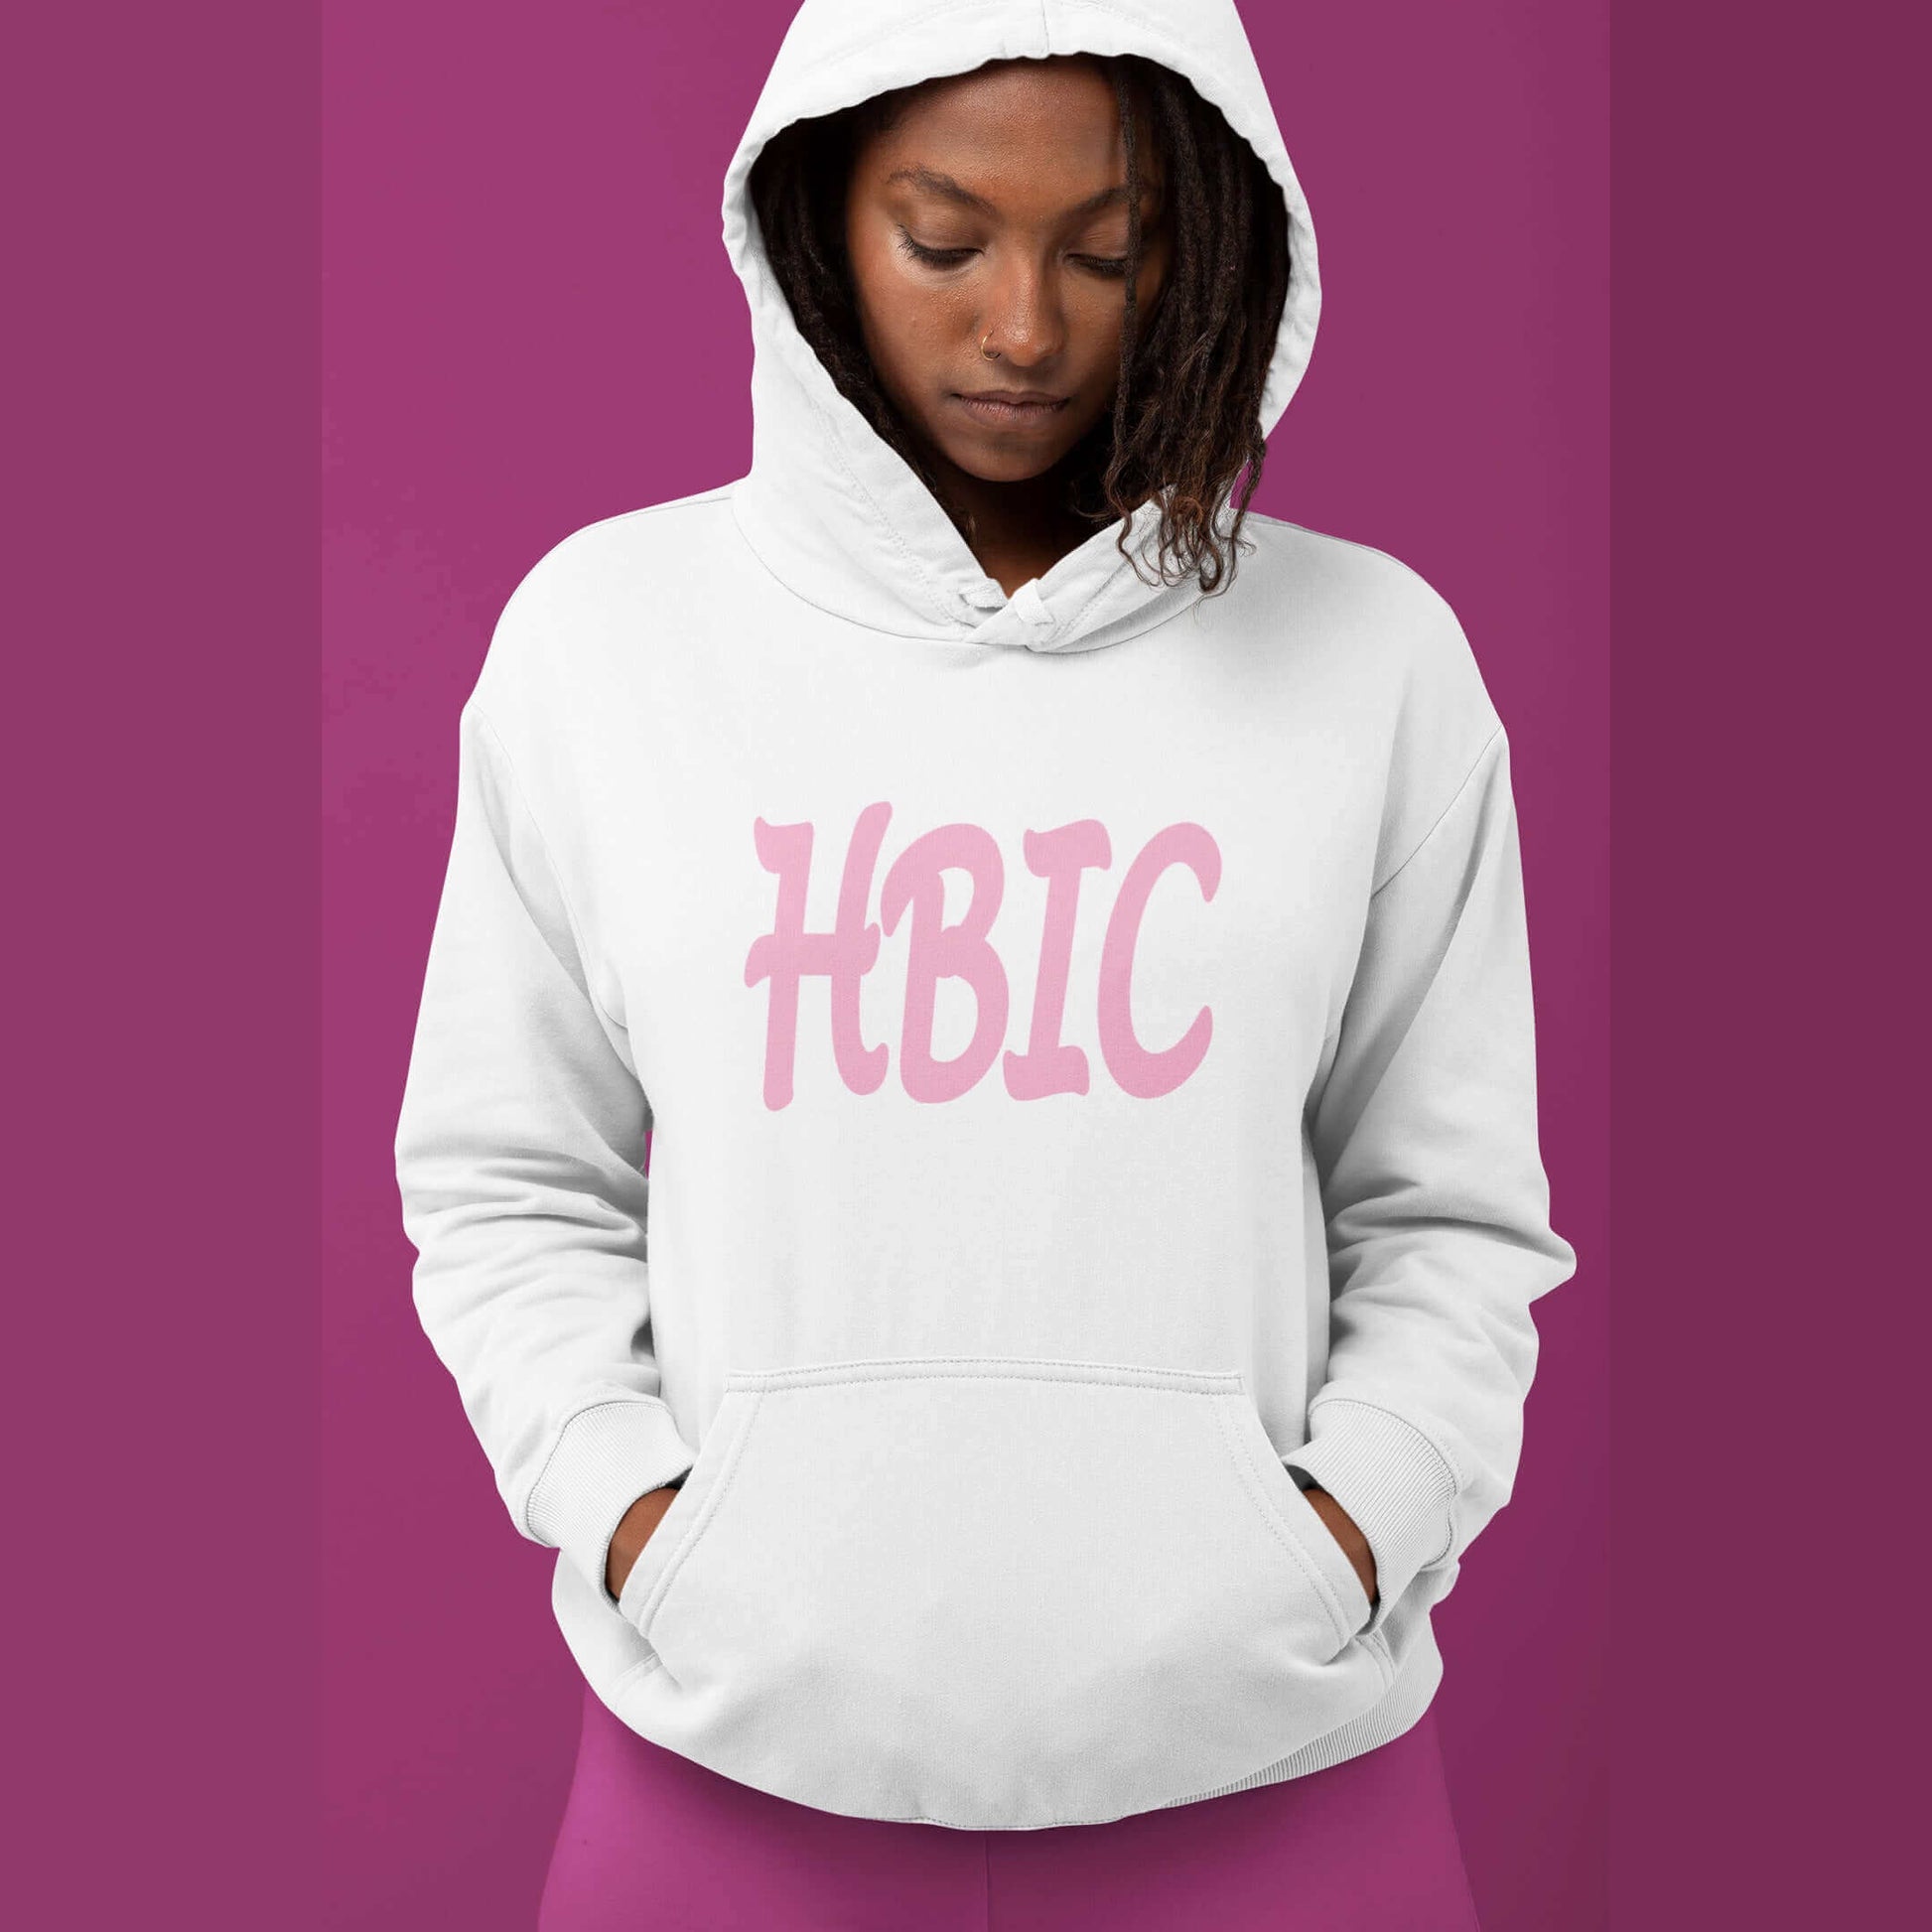 Woman wearing white hooded sweatshirt with the acronym HBIC printed on the front in pink text.